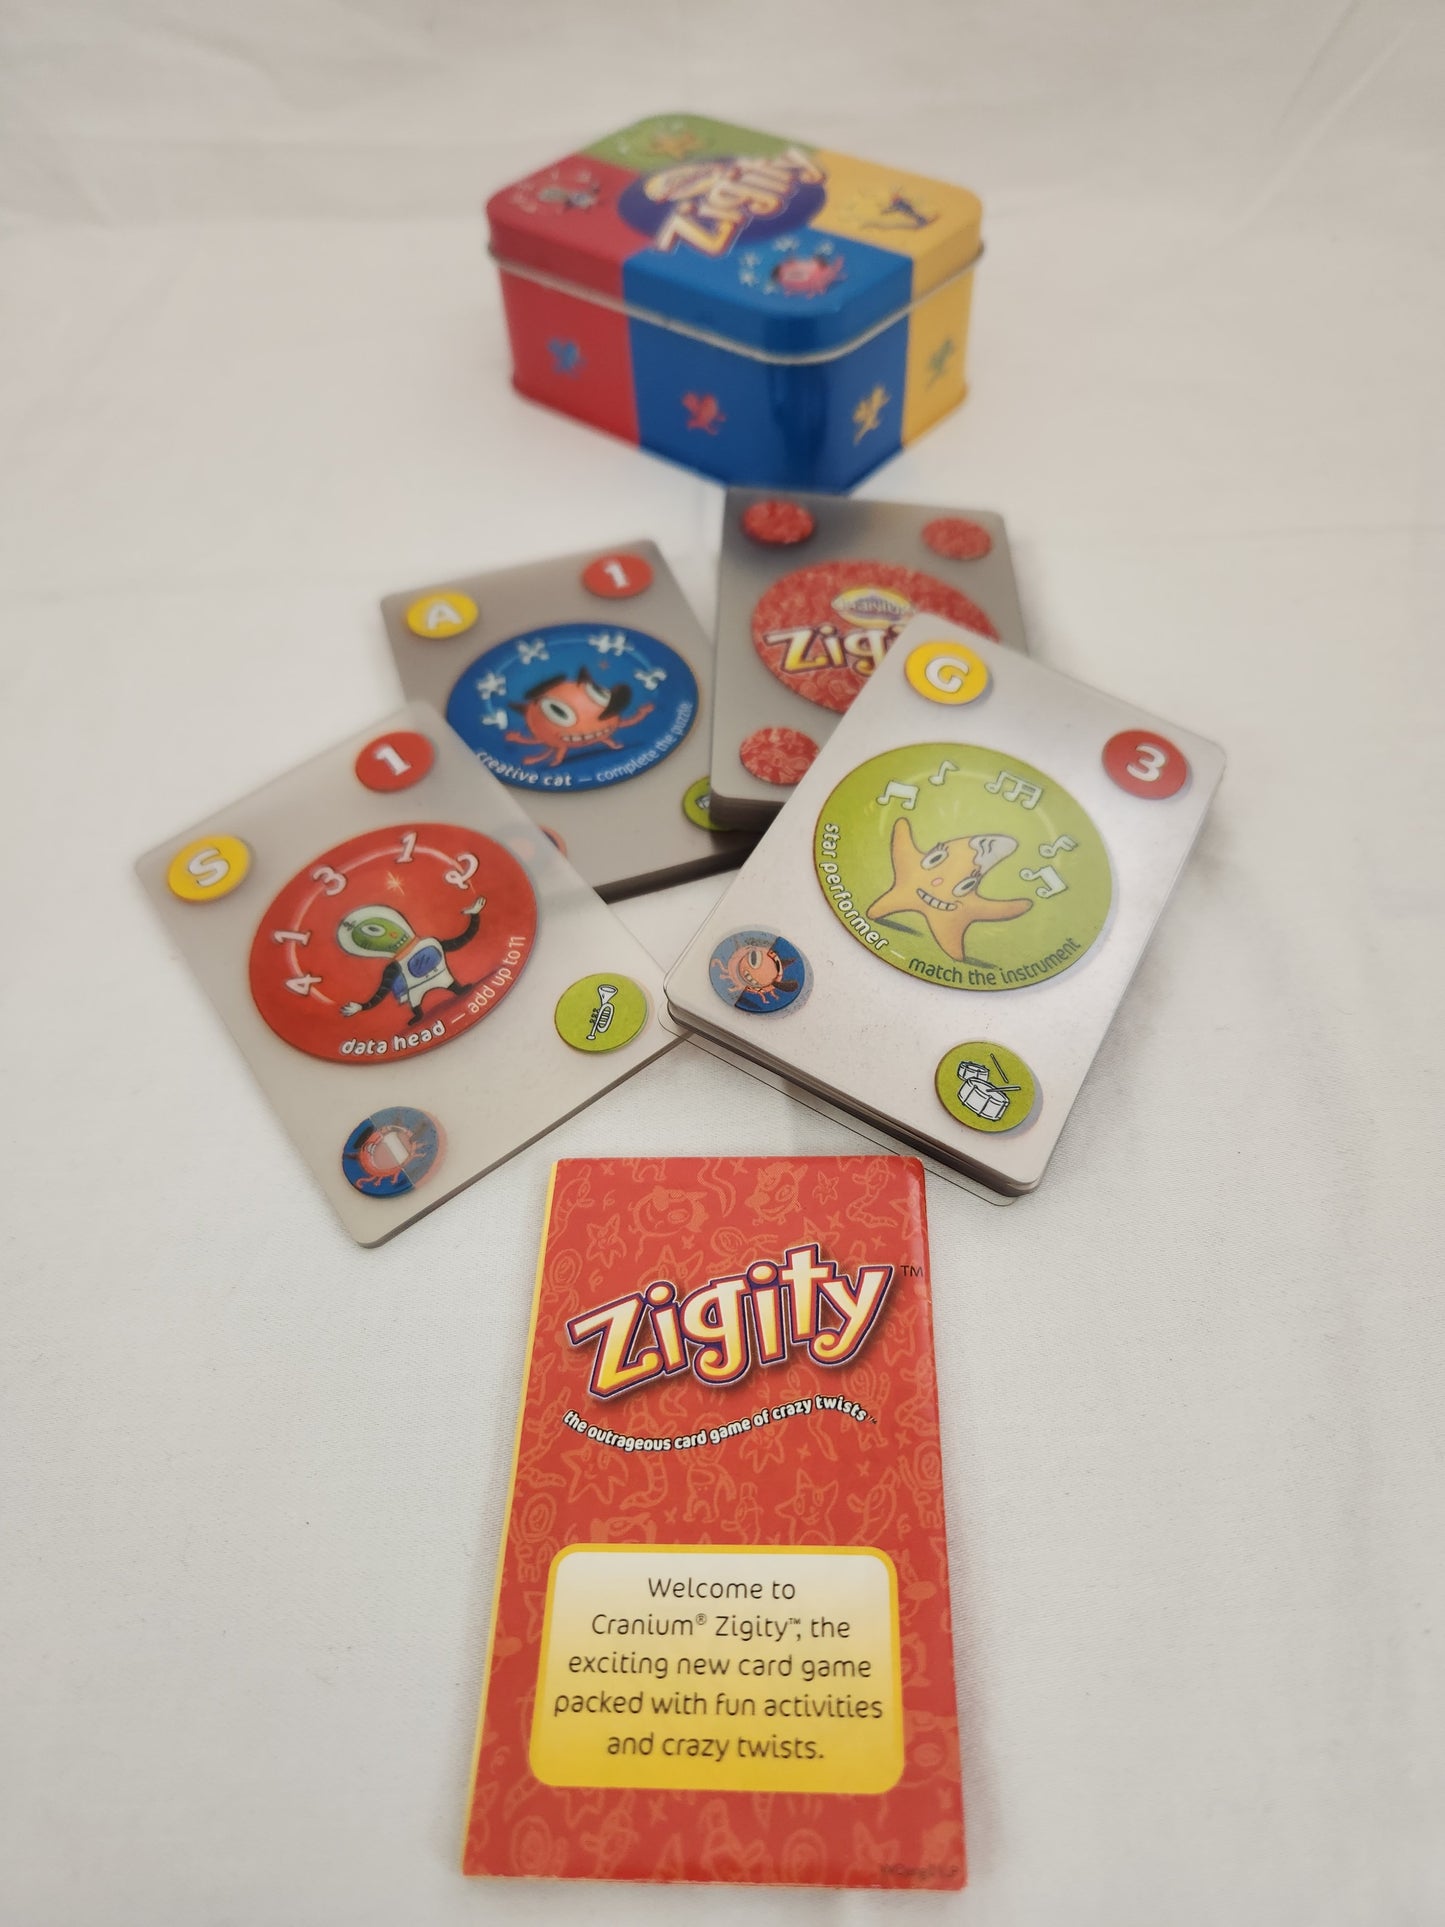 Zigity Card Game by Cranium in a Metal Tin